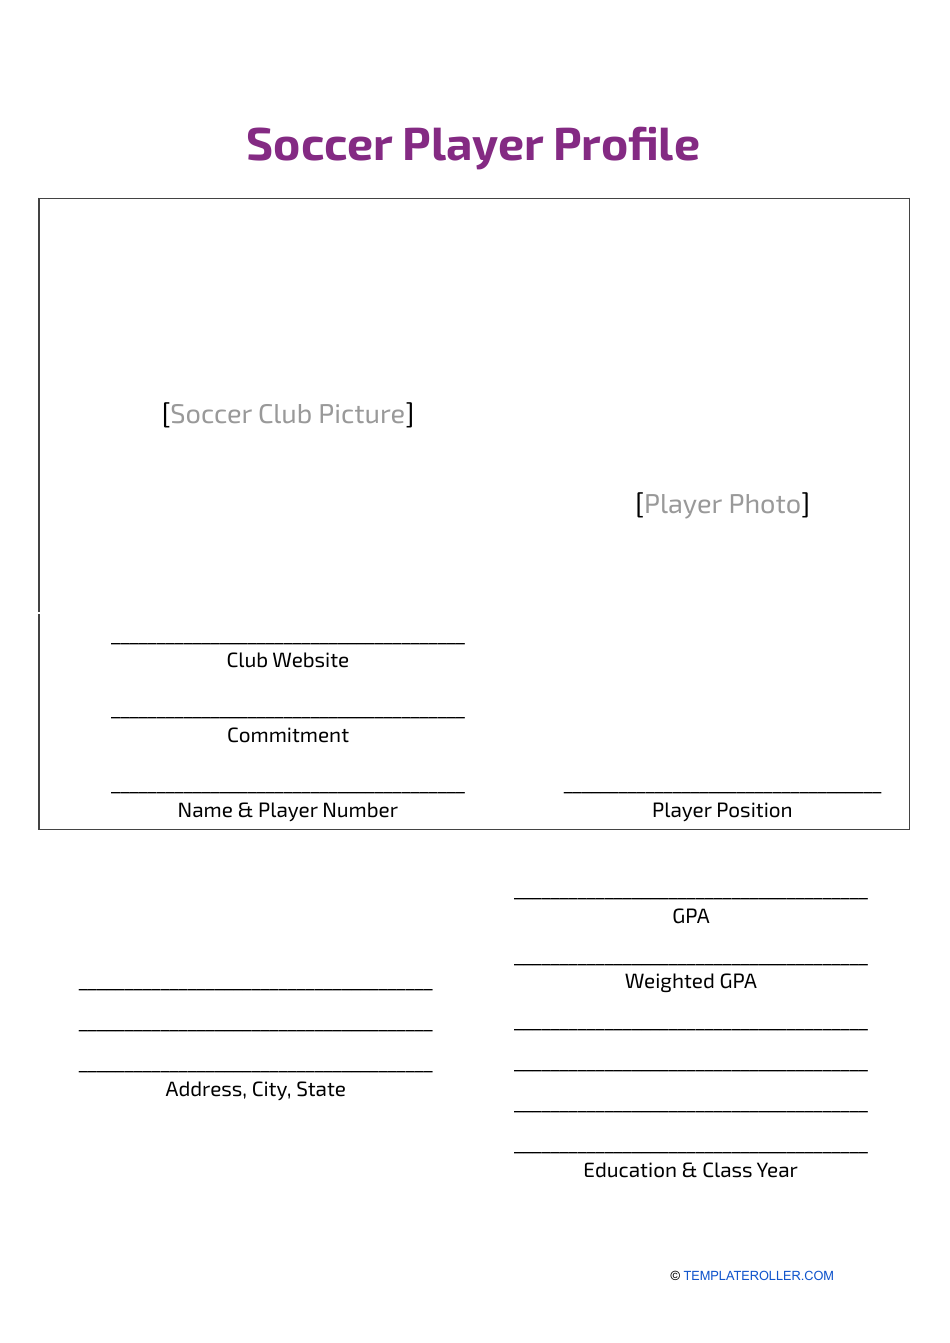 Soccer Player Profile Template Download Printable PDF Templateroller